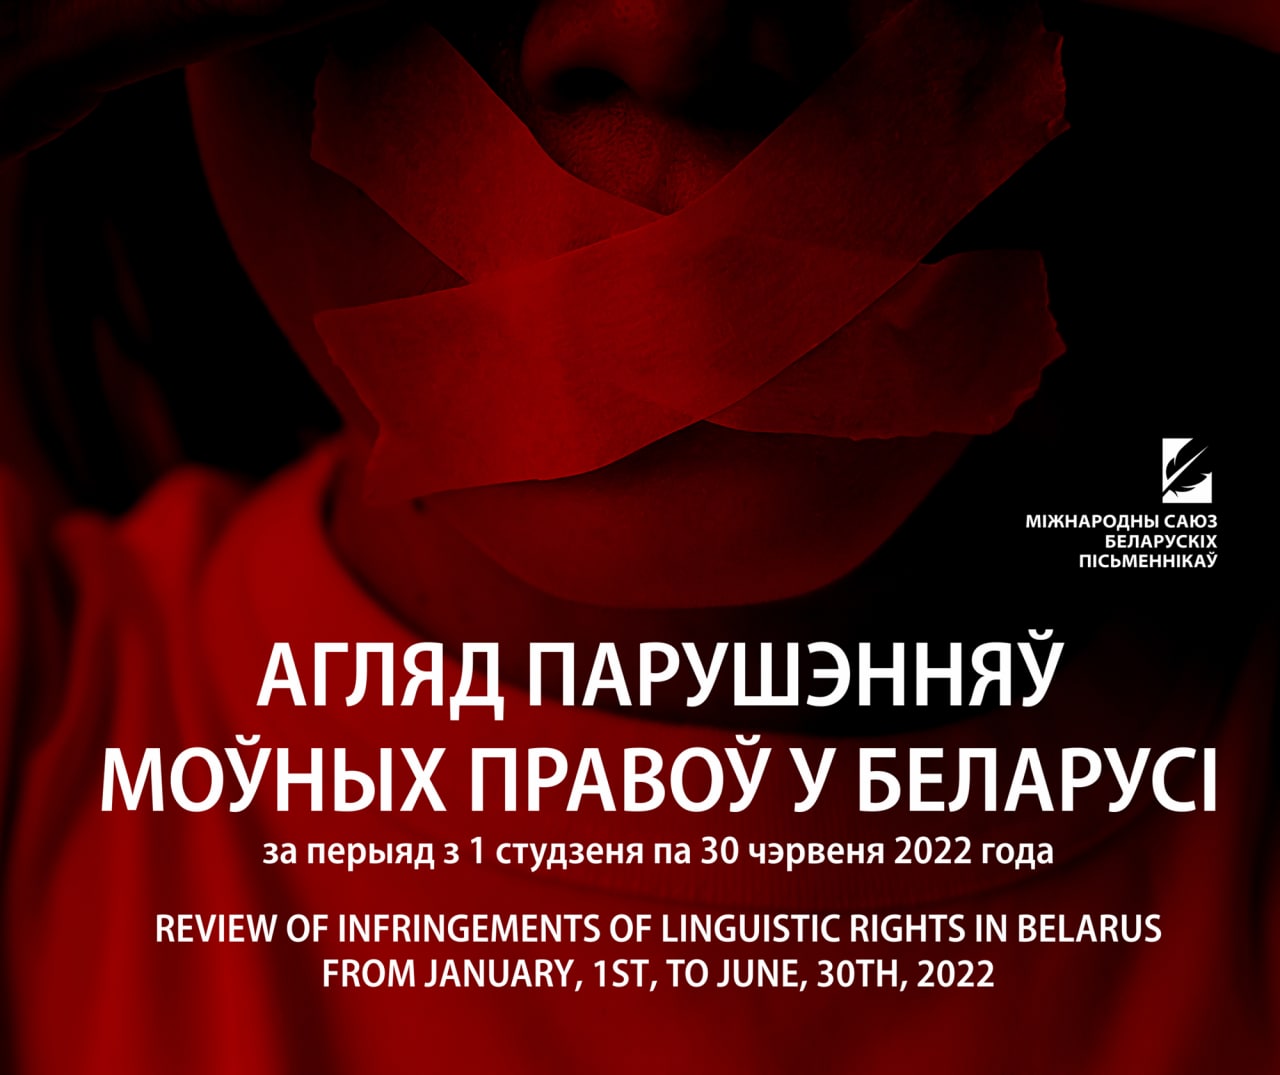 Review of infringements of linguistic rights in Belarus from January, 1st, to June, 30th, 2022